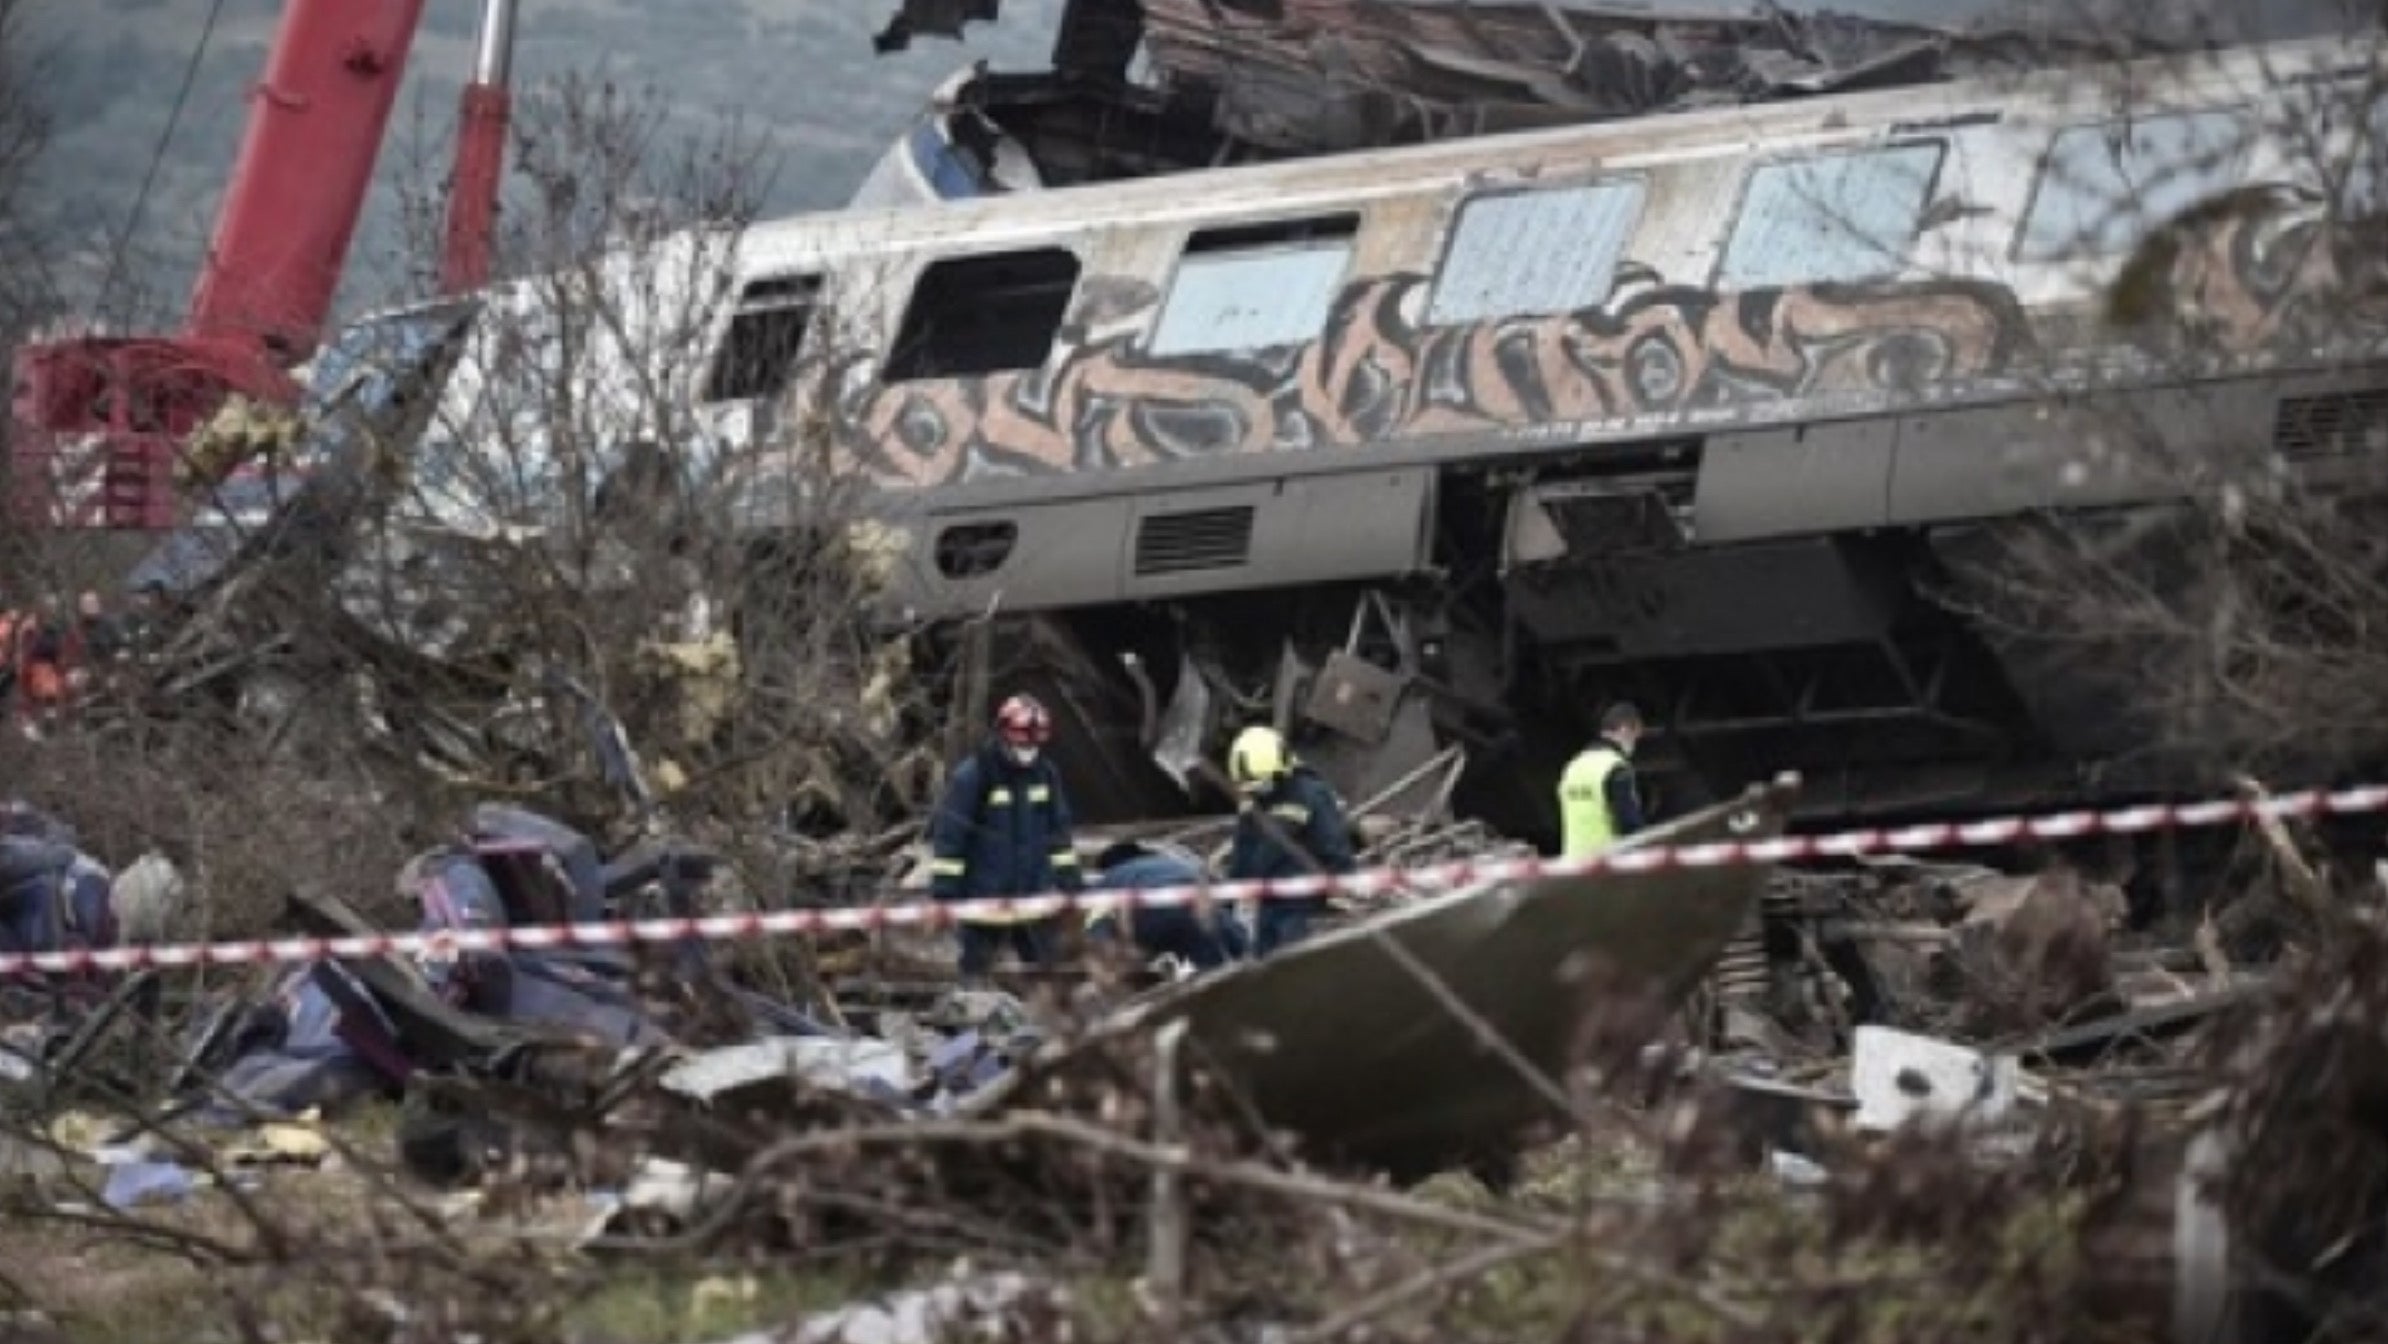 Greece in shock after a head-on collision between two trains, Magnate Daily